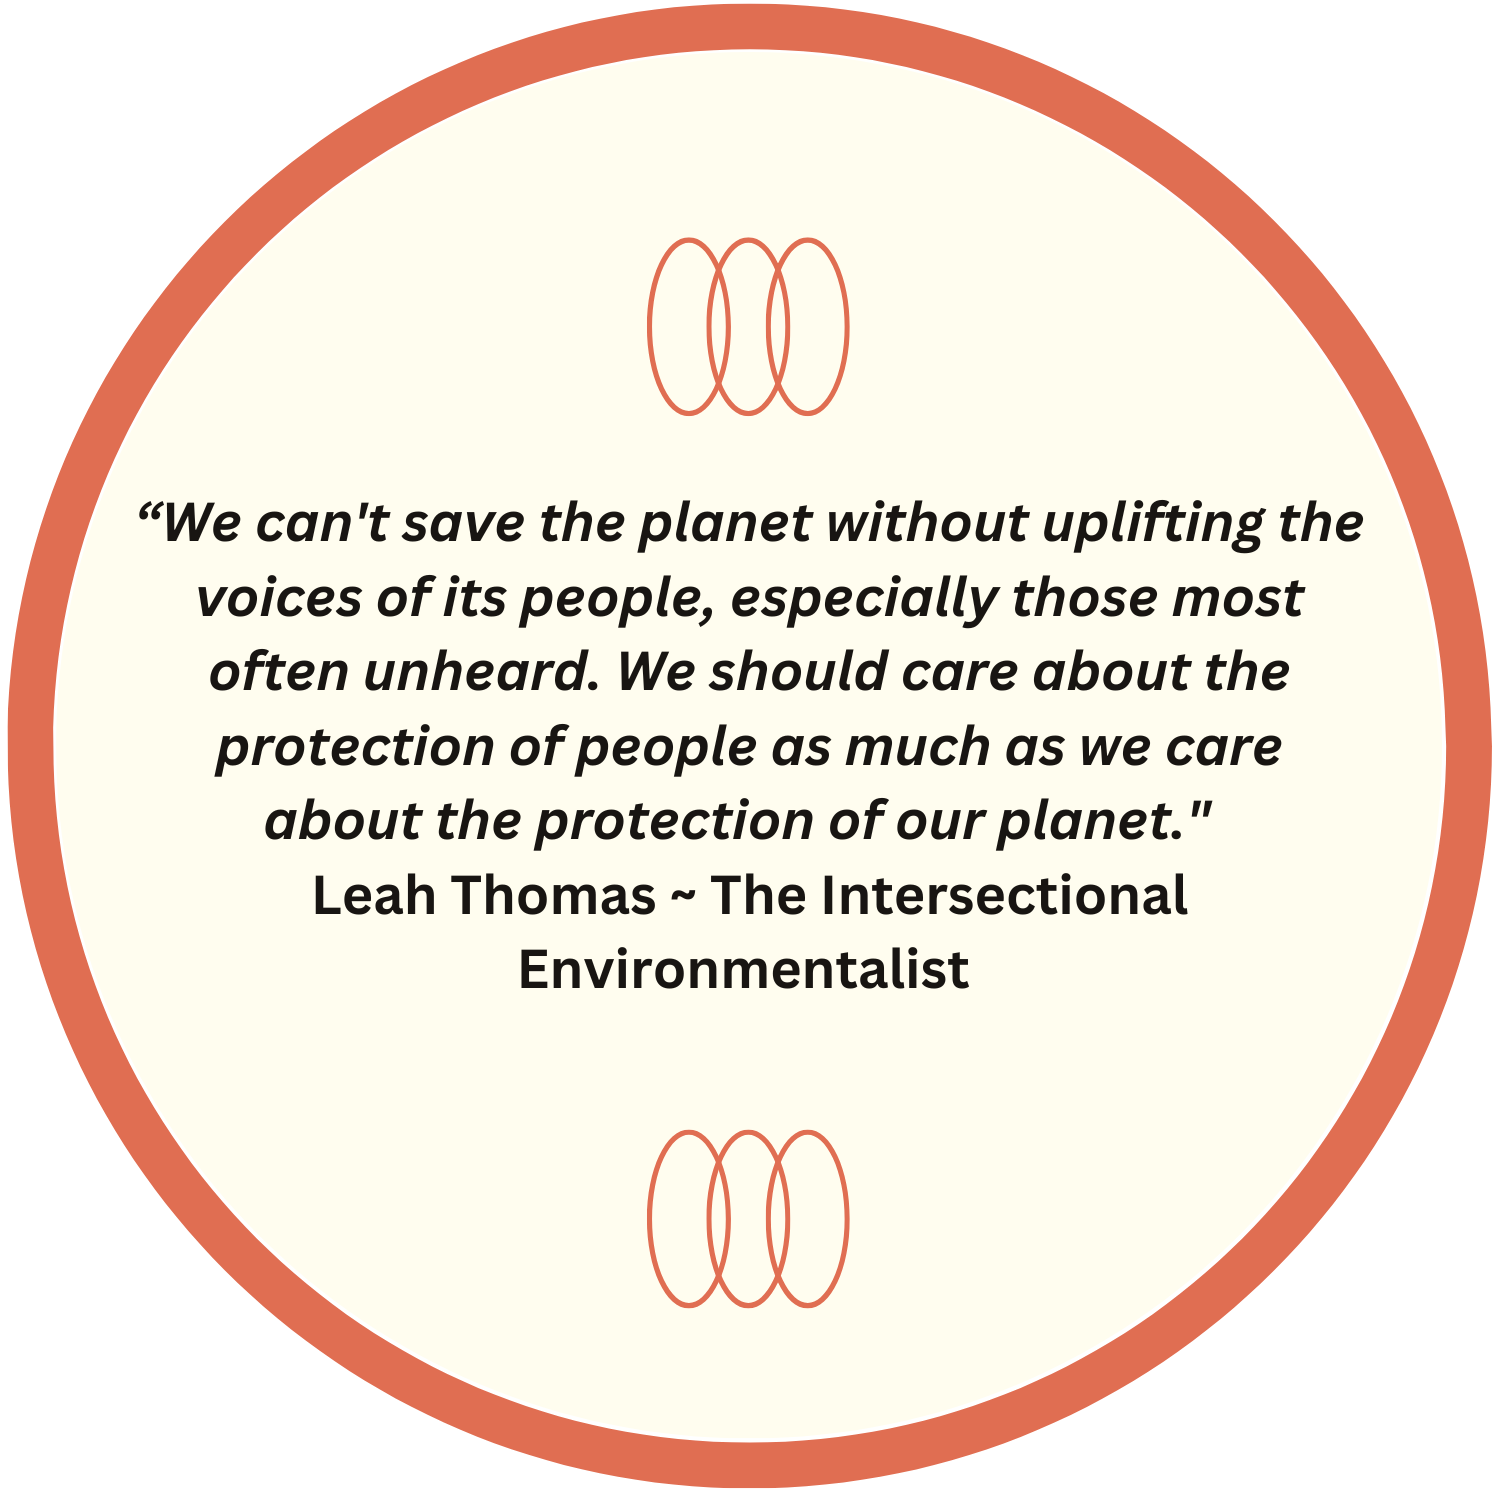 “We can't save the planet without uplifting the voices of its people, especially those most often unheard. We should care about the protection of people as much as we care about the protection of our planet." Leah Thomas ~ The Intersectional Environmentalist